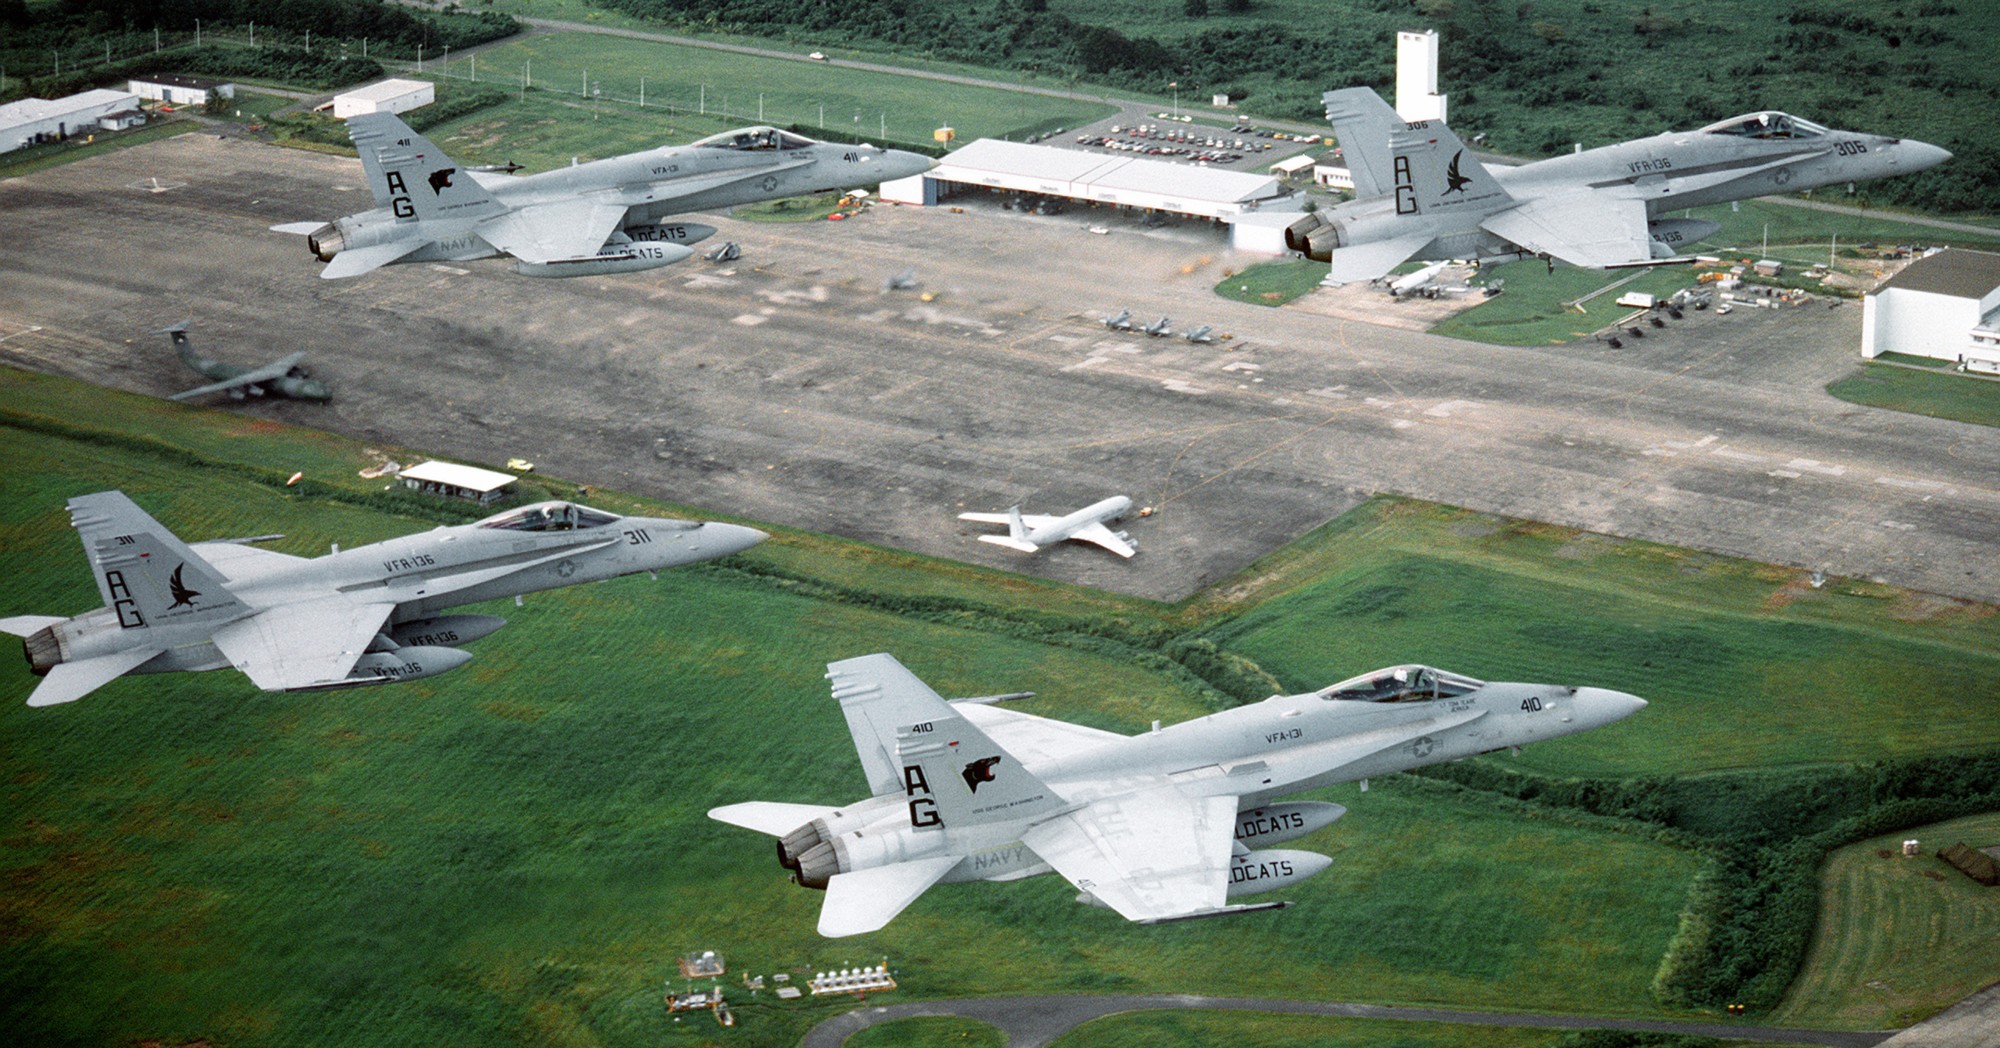 vfa-131 wildcats strike fighter squadron f/a-18c hornet naval station roosevelt roads puerto rico 1992 123